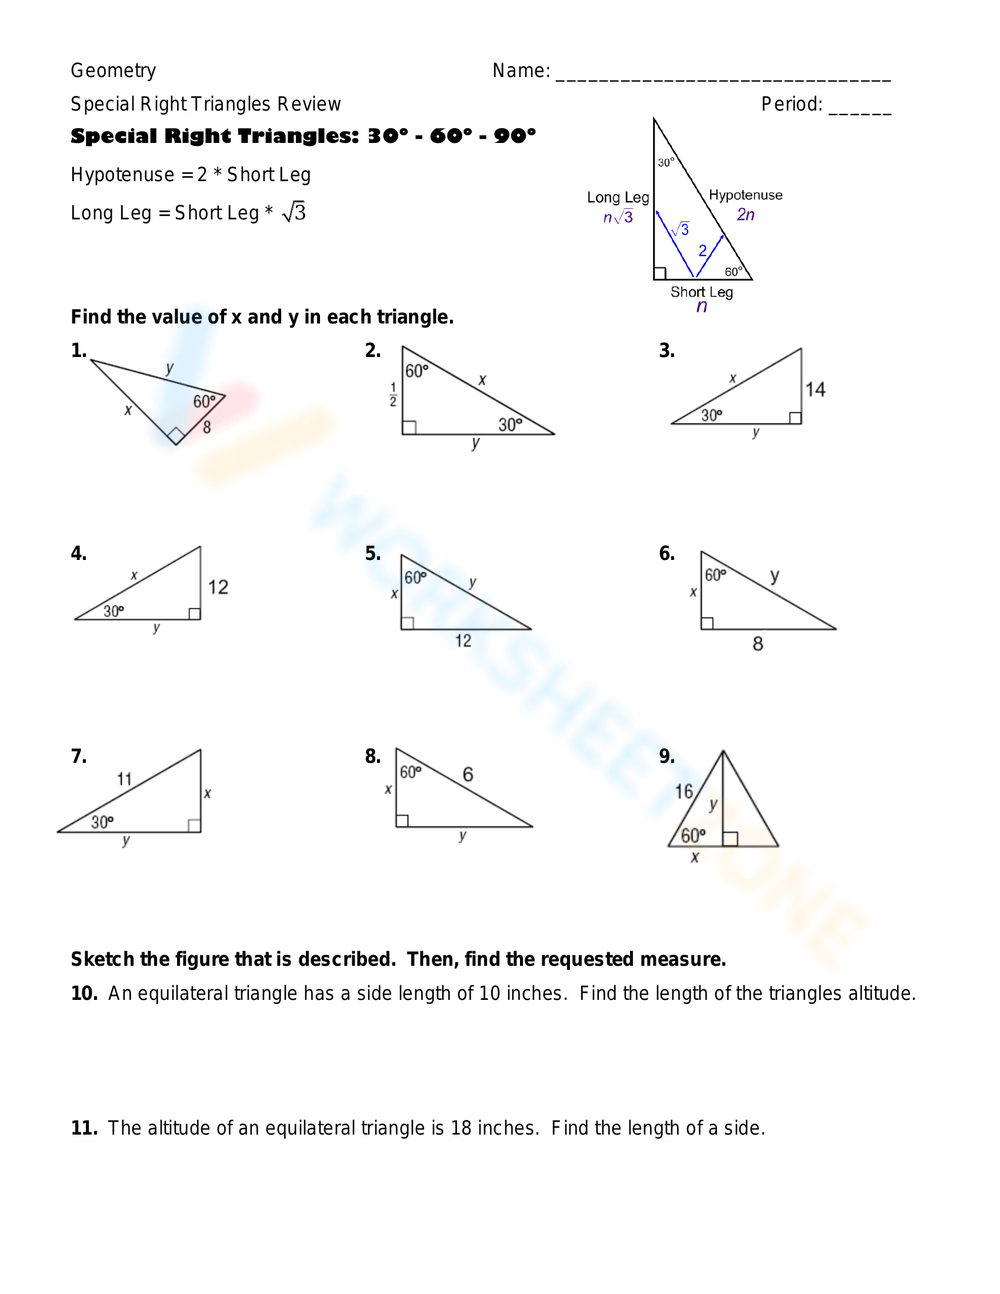 Special Right Triangles Review Worksheet 0276